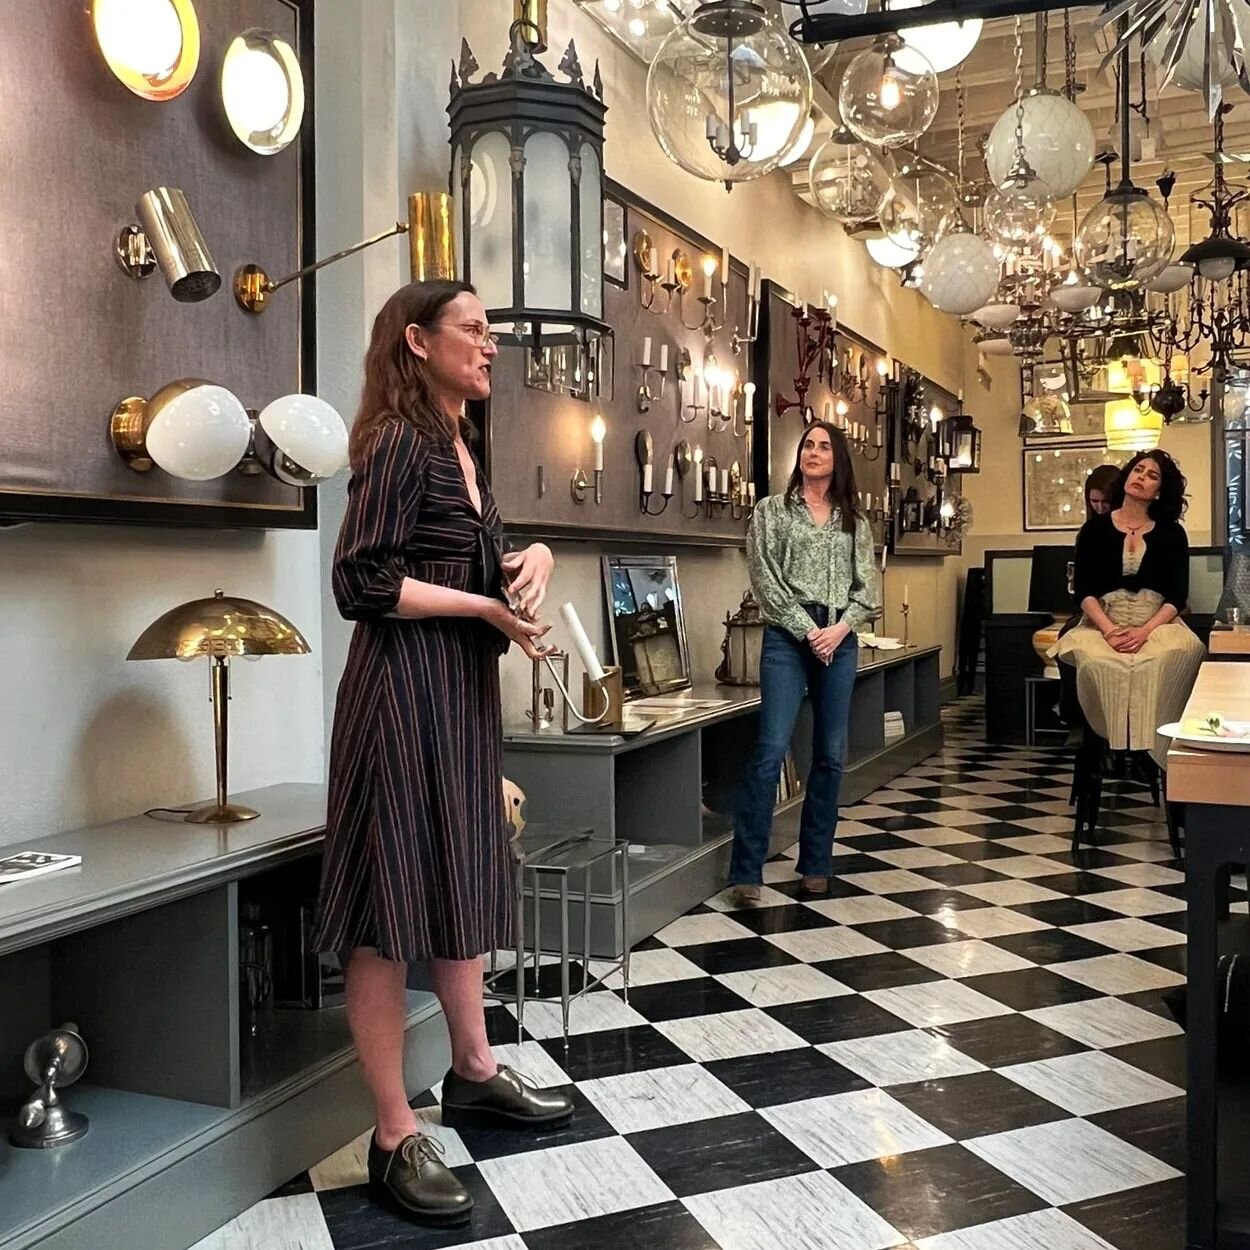 Thank you @remainslighting and @circaphiles for having us for this special lighting workshop last week! Our students had the opportunity to learn more about all things lighting directly from the experts at the showroom.